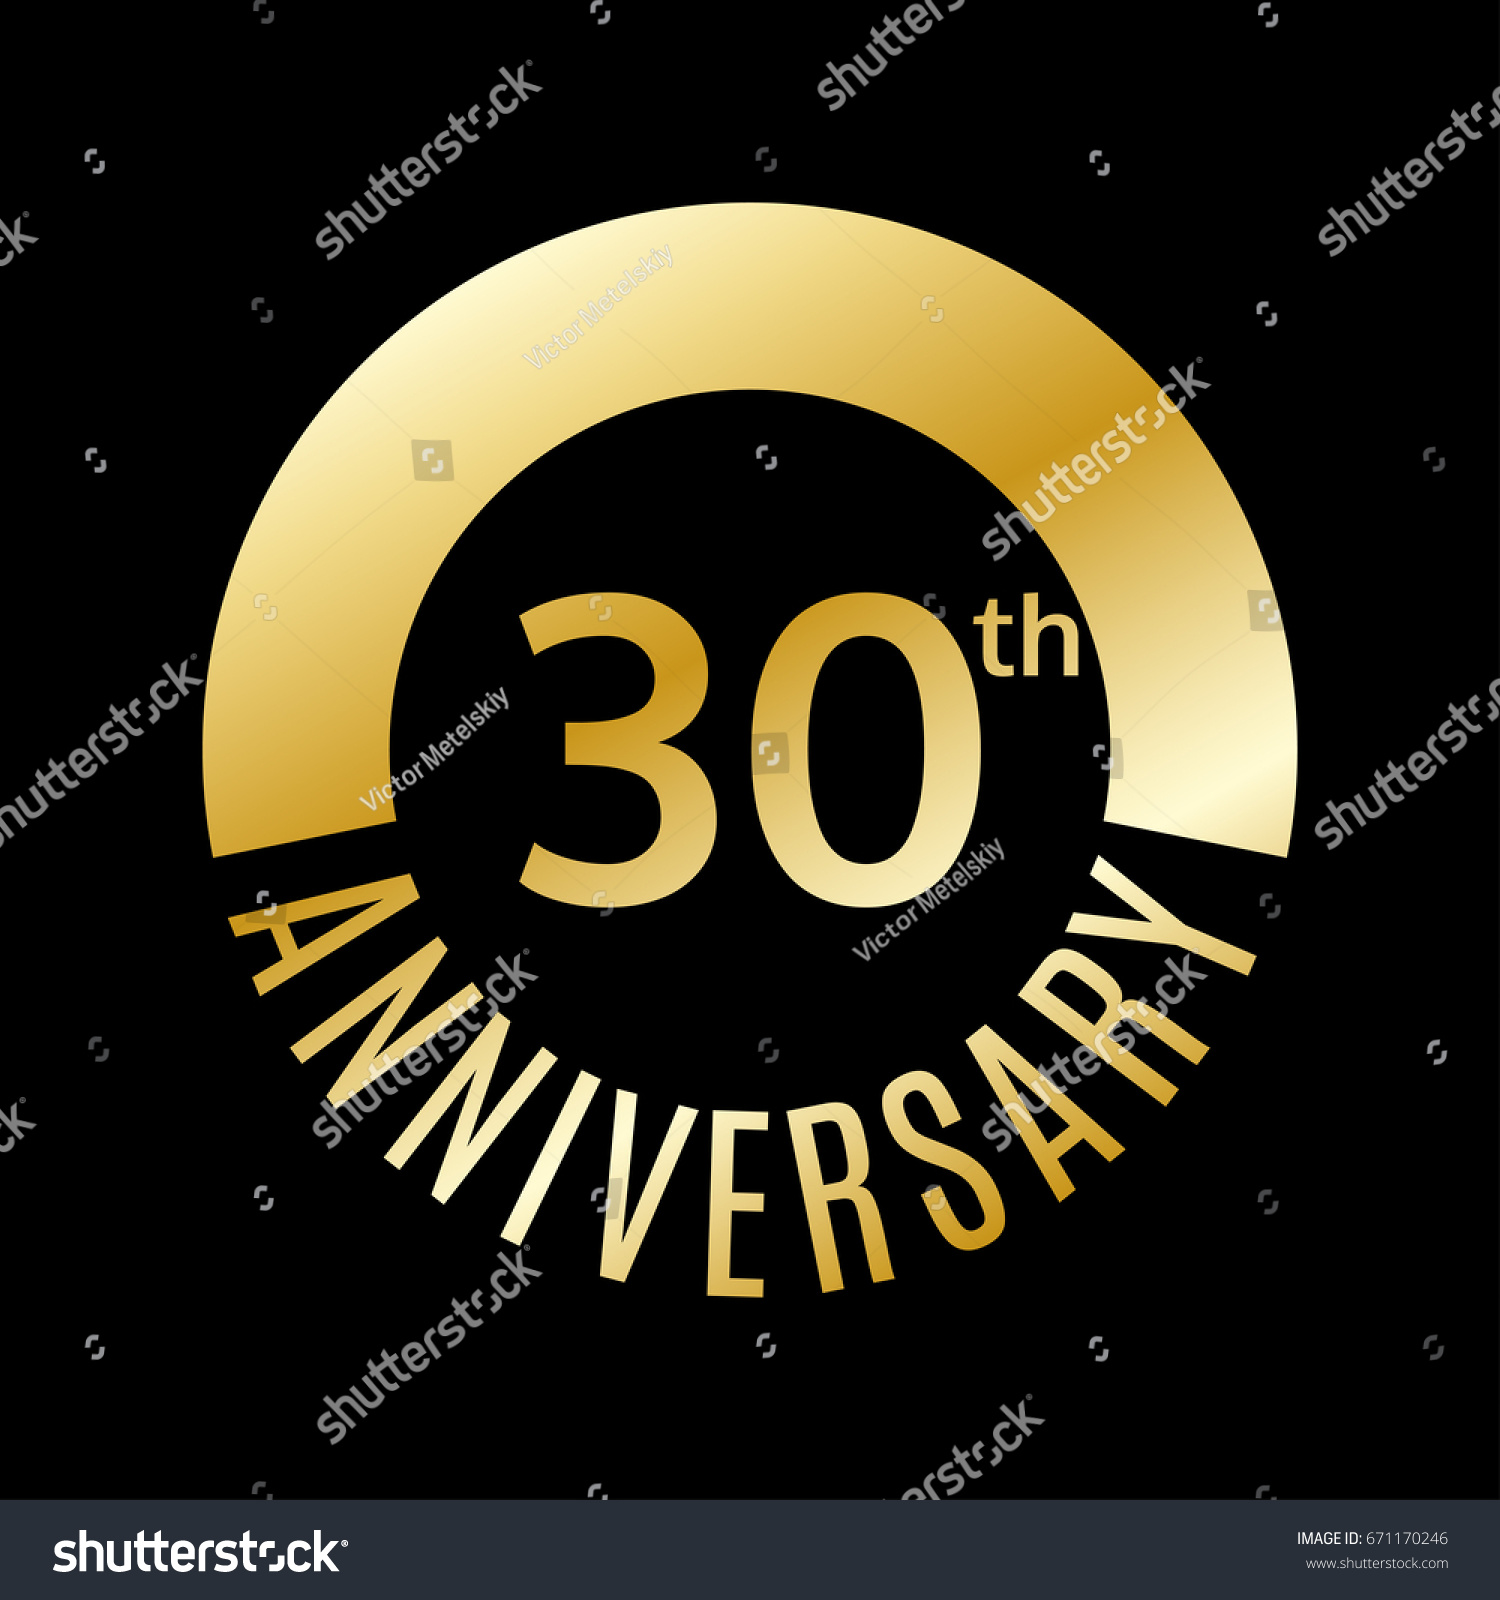 Download 30 Years Anniversary Icon 30th Celebrating Stock Vector ...